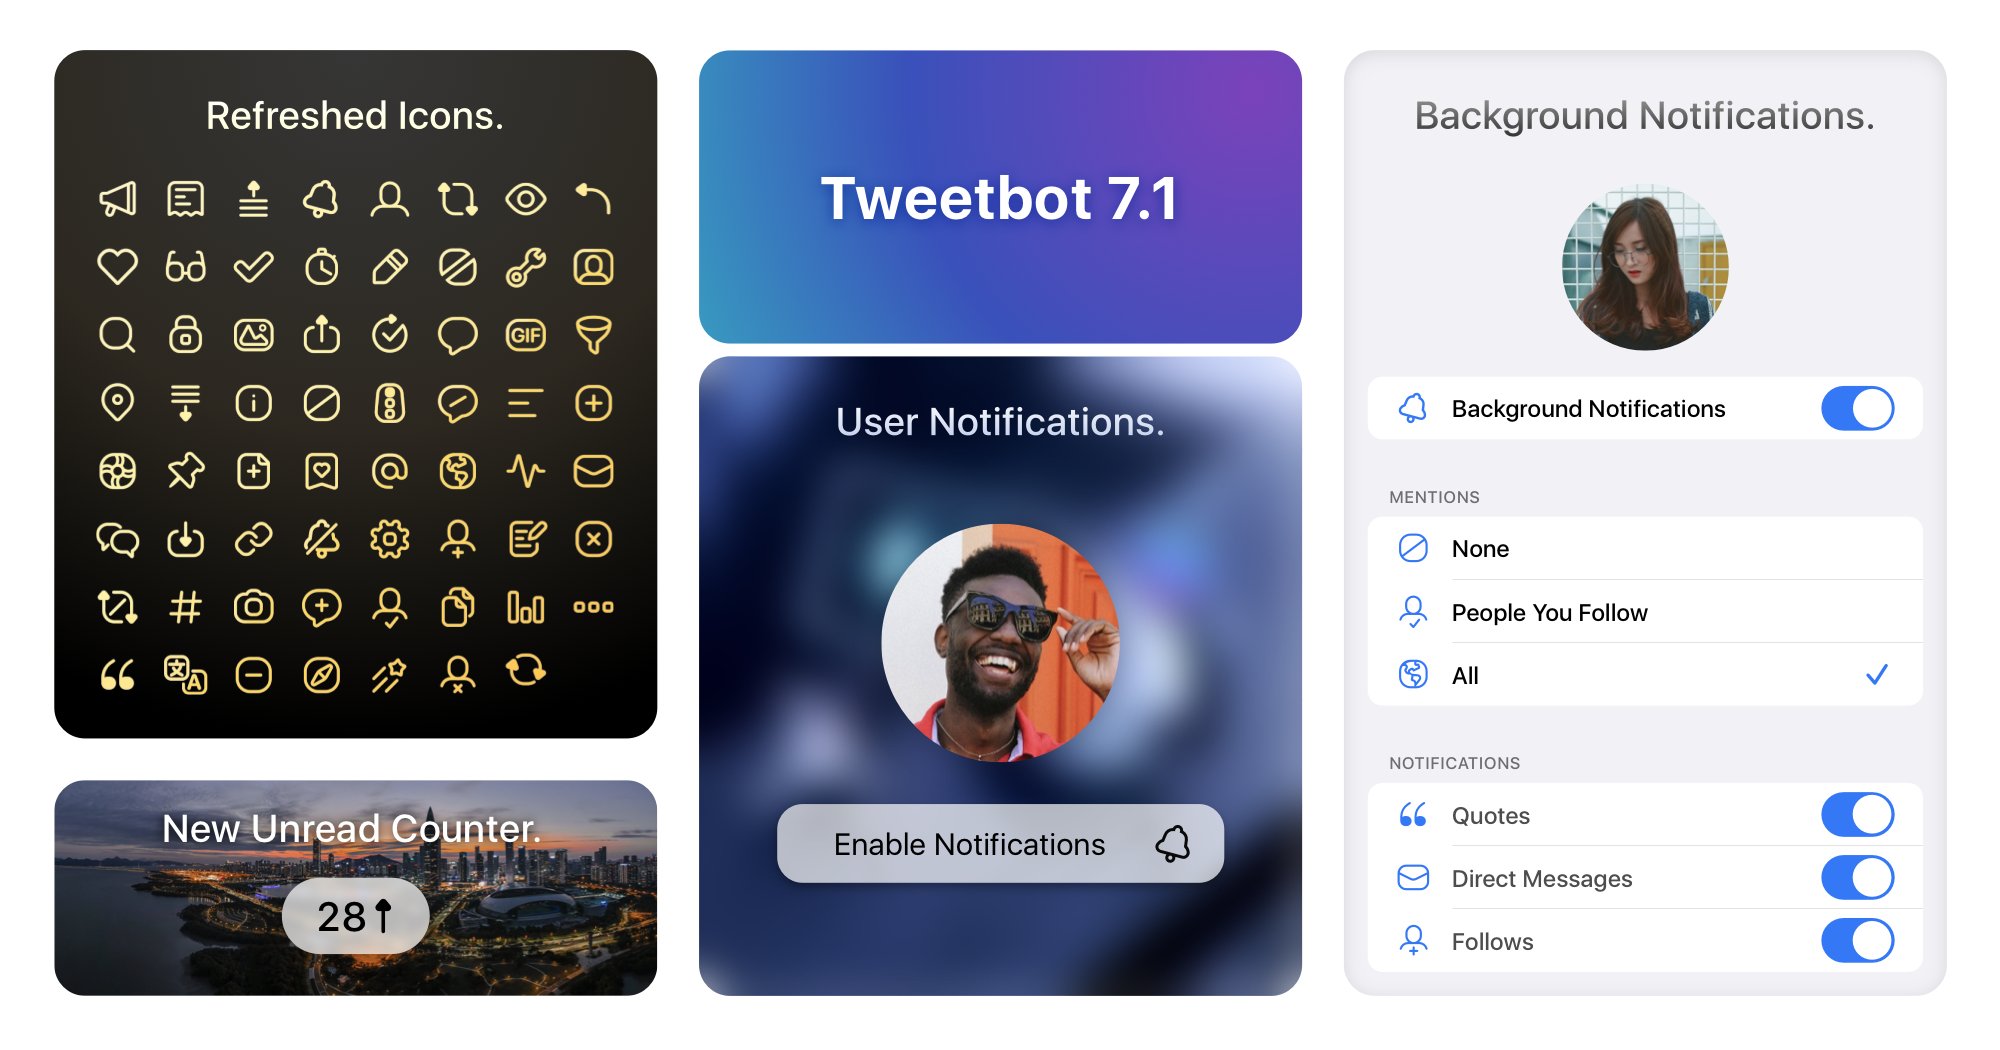 Tweetbot 7.1 for iOS